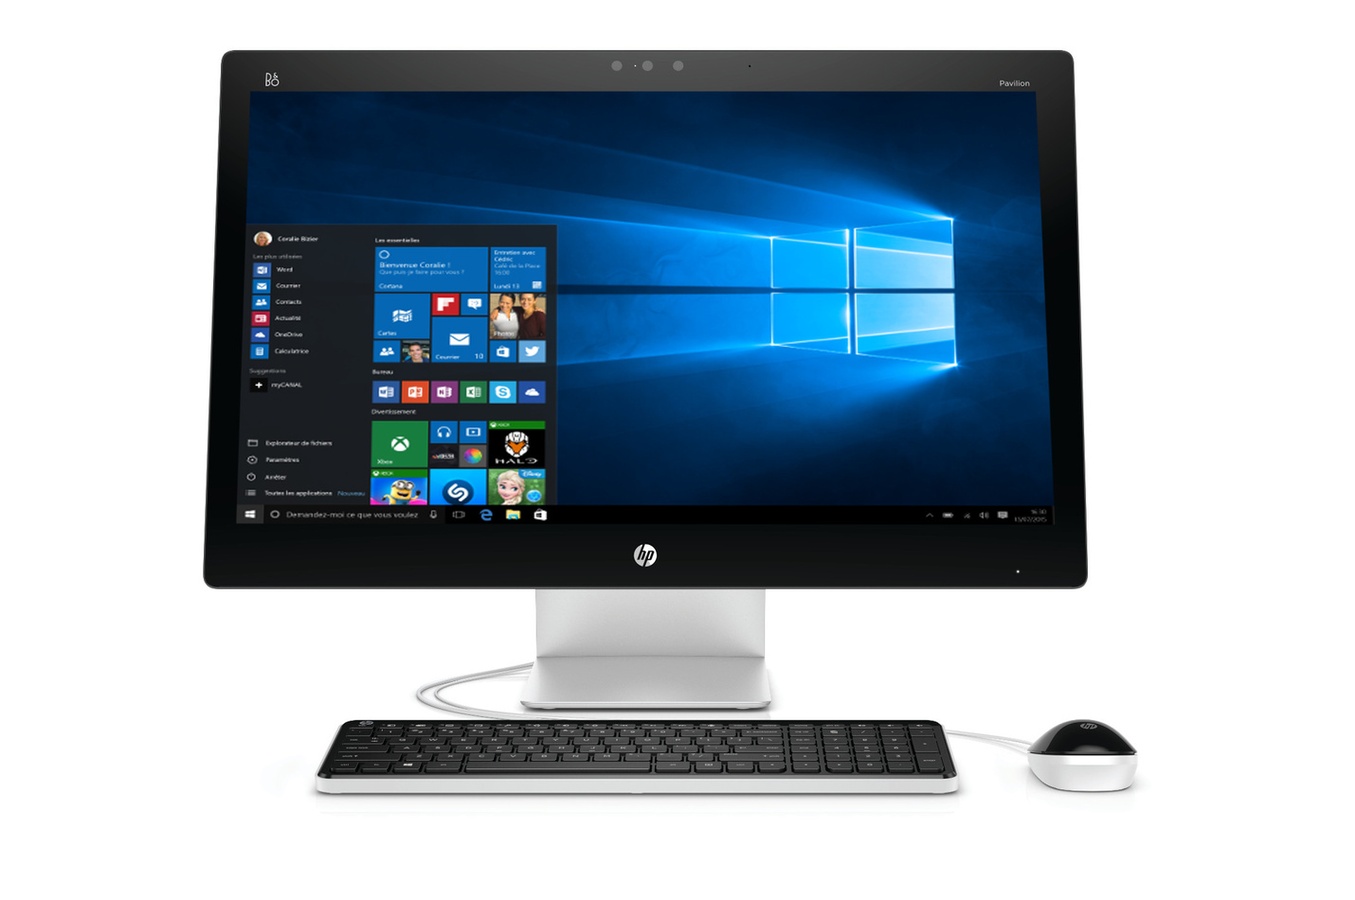 HP Pavilion all in one 27